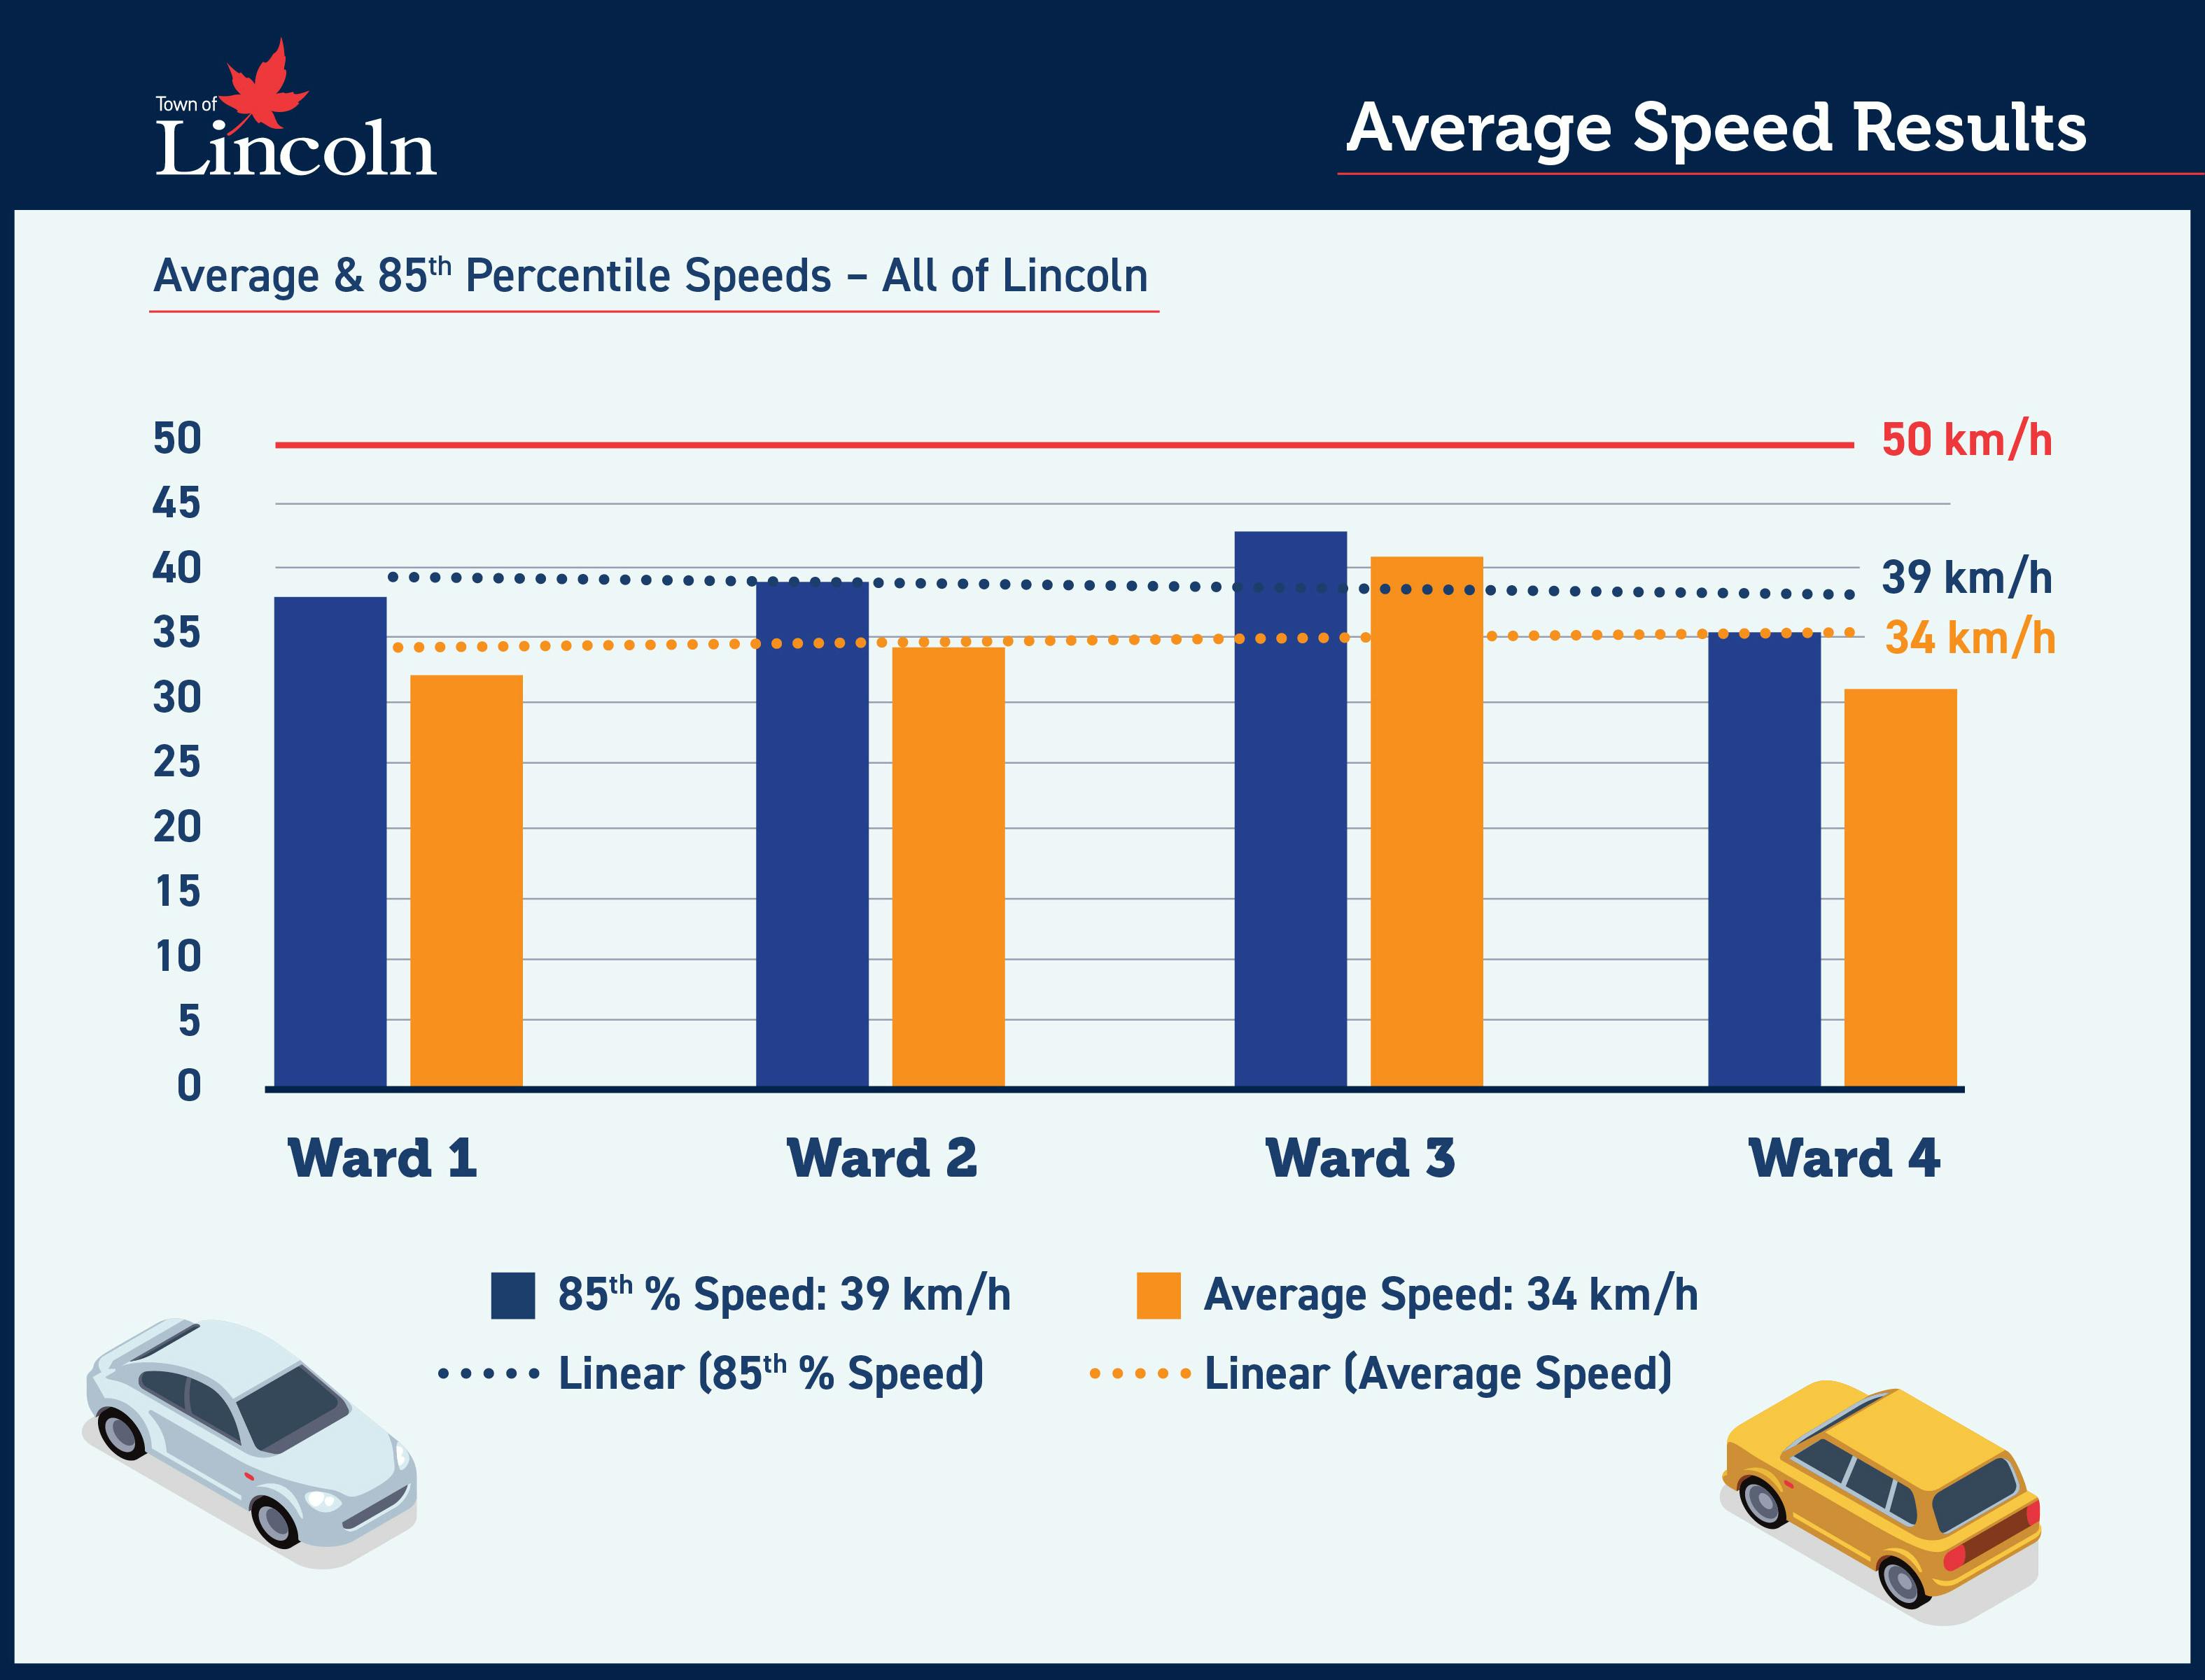 Average Speed Results by Ward